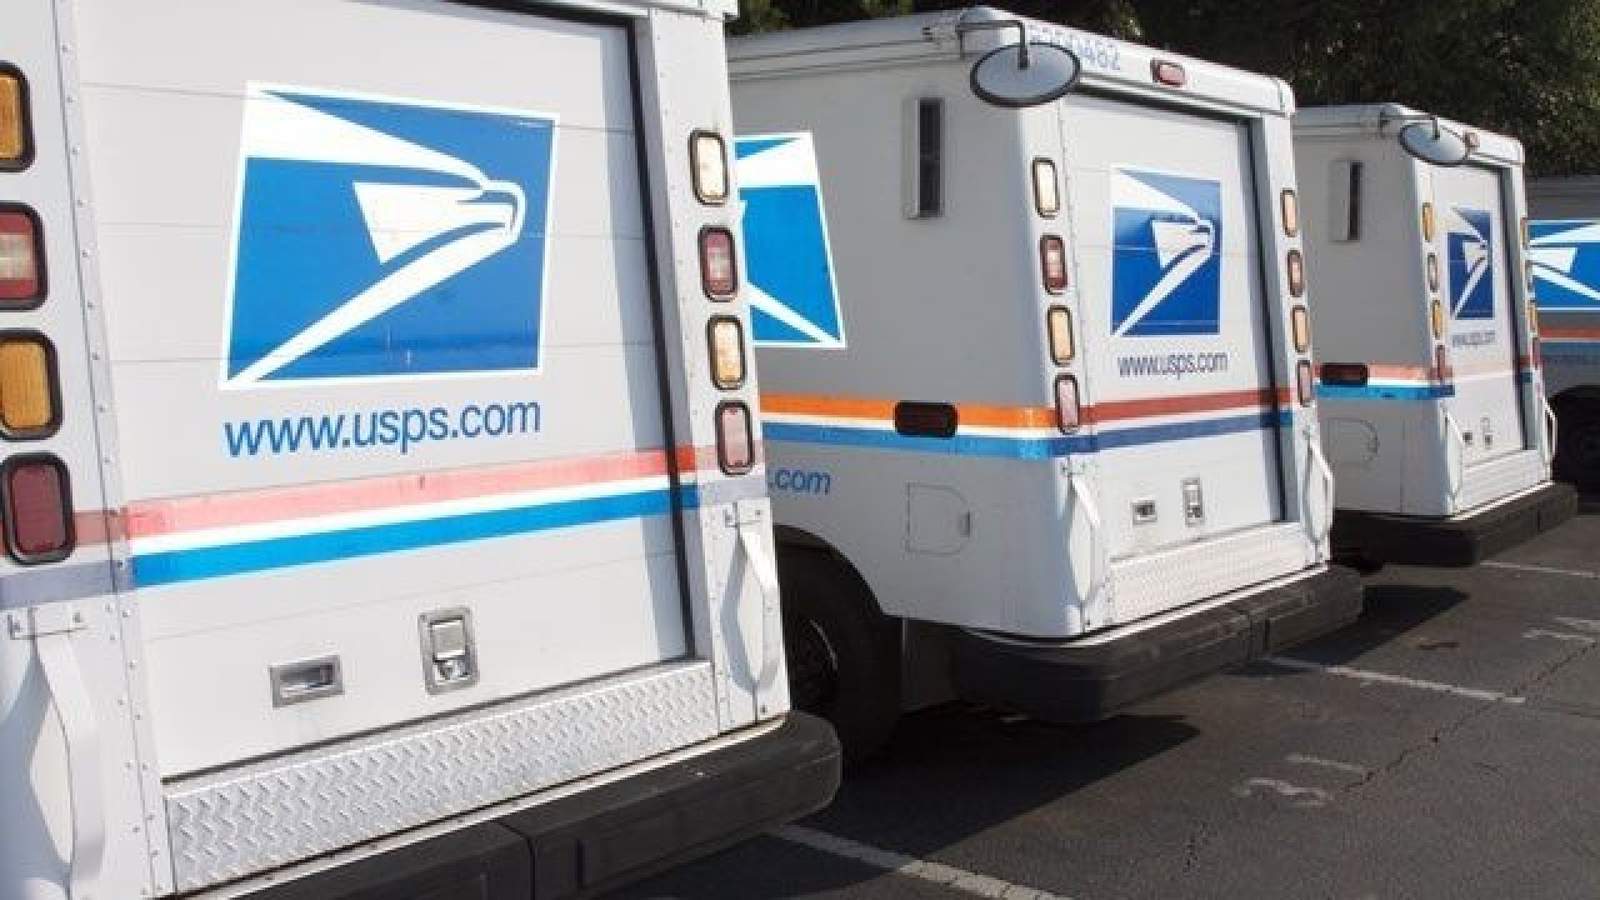 Feds: West Virginia mail carrier altered ballot requests